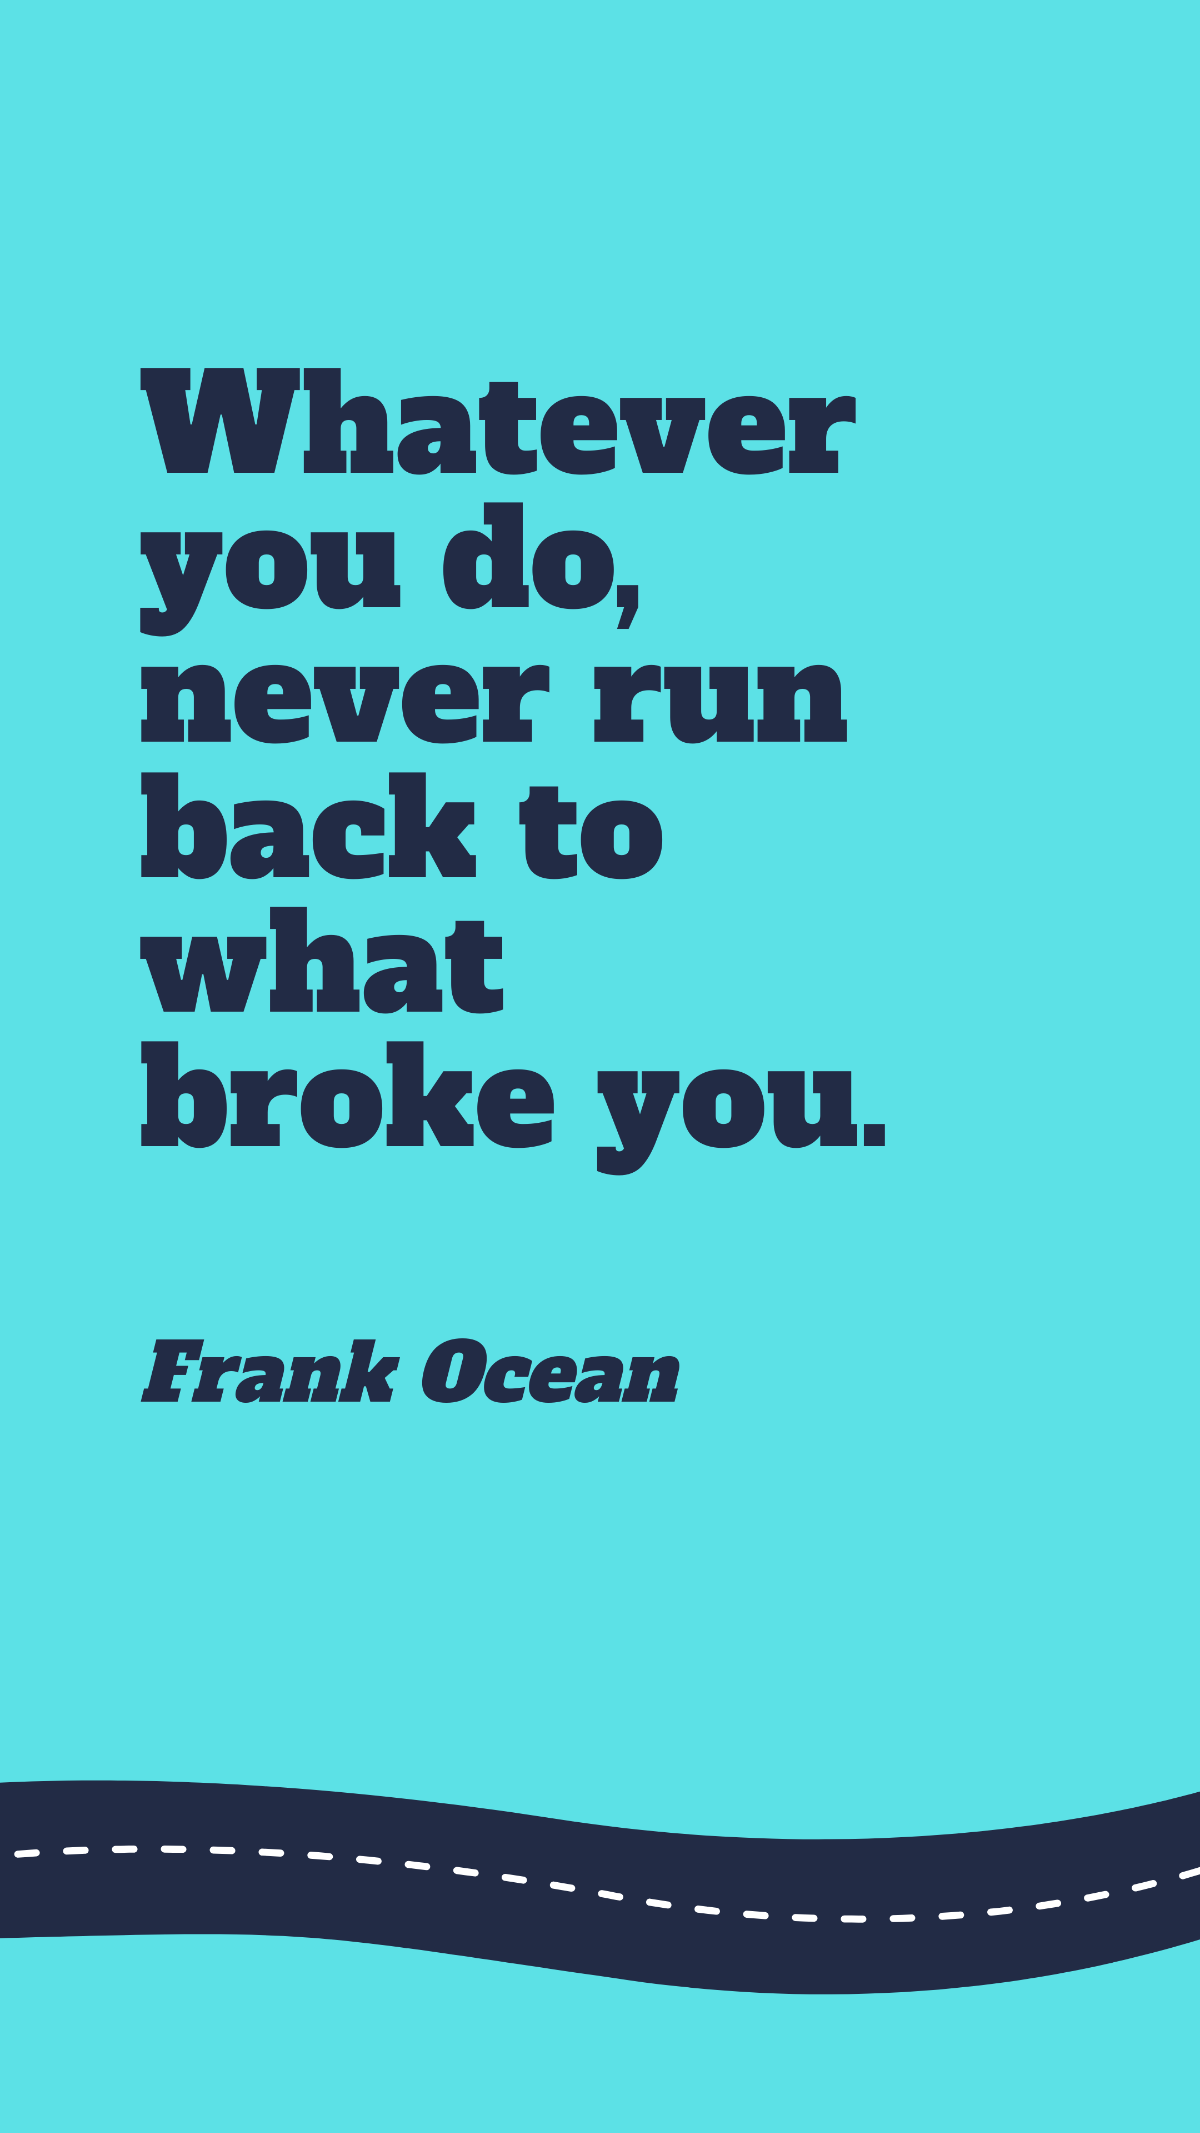 Free Frank Ocean - Whatever you do, never run back to what broke you. Template